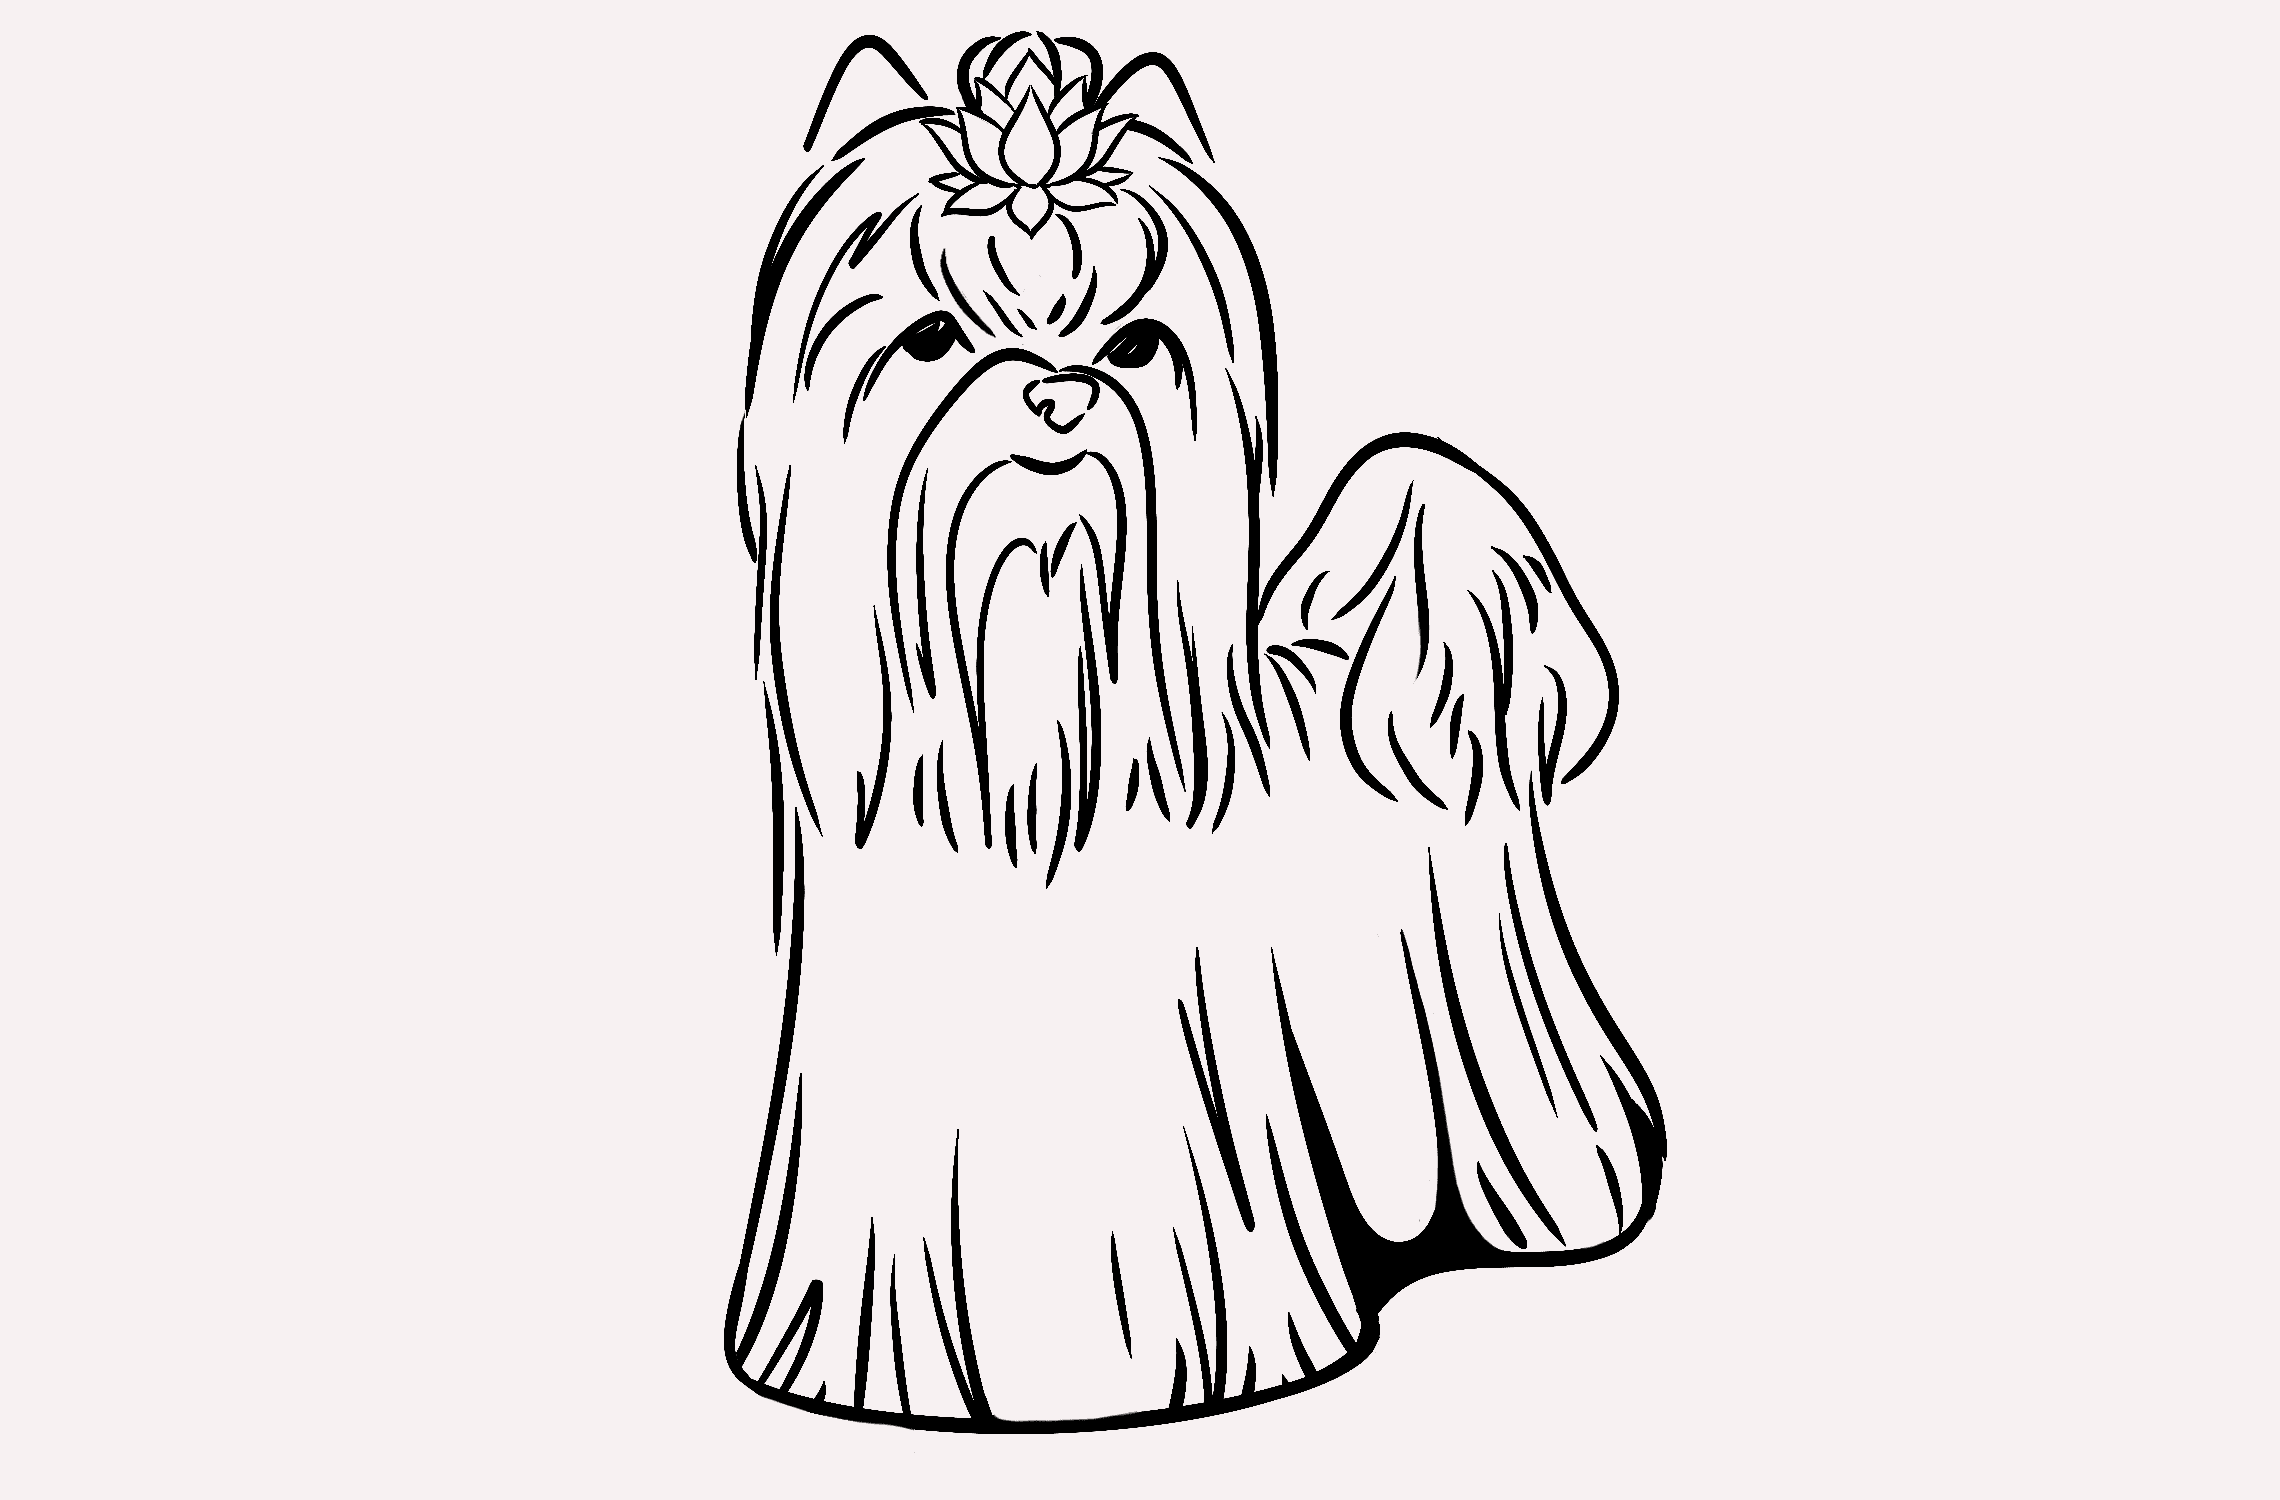 A drawing of a dog with long hair.